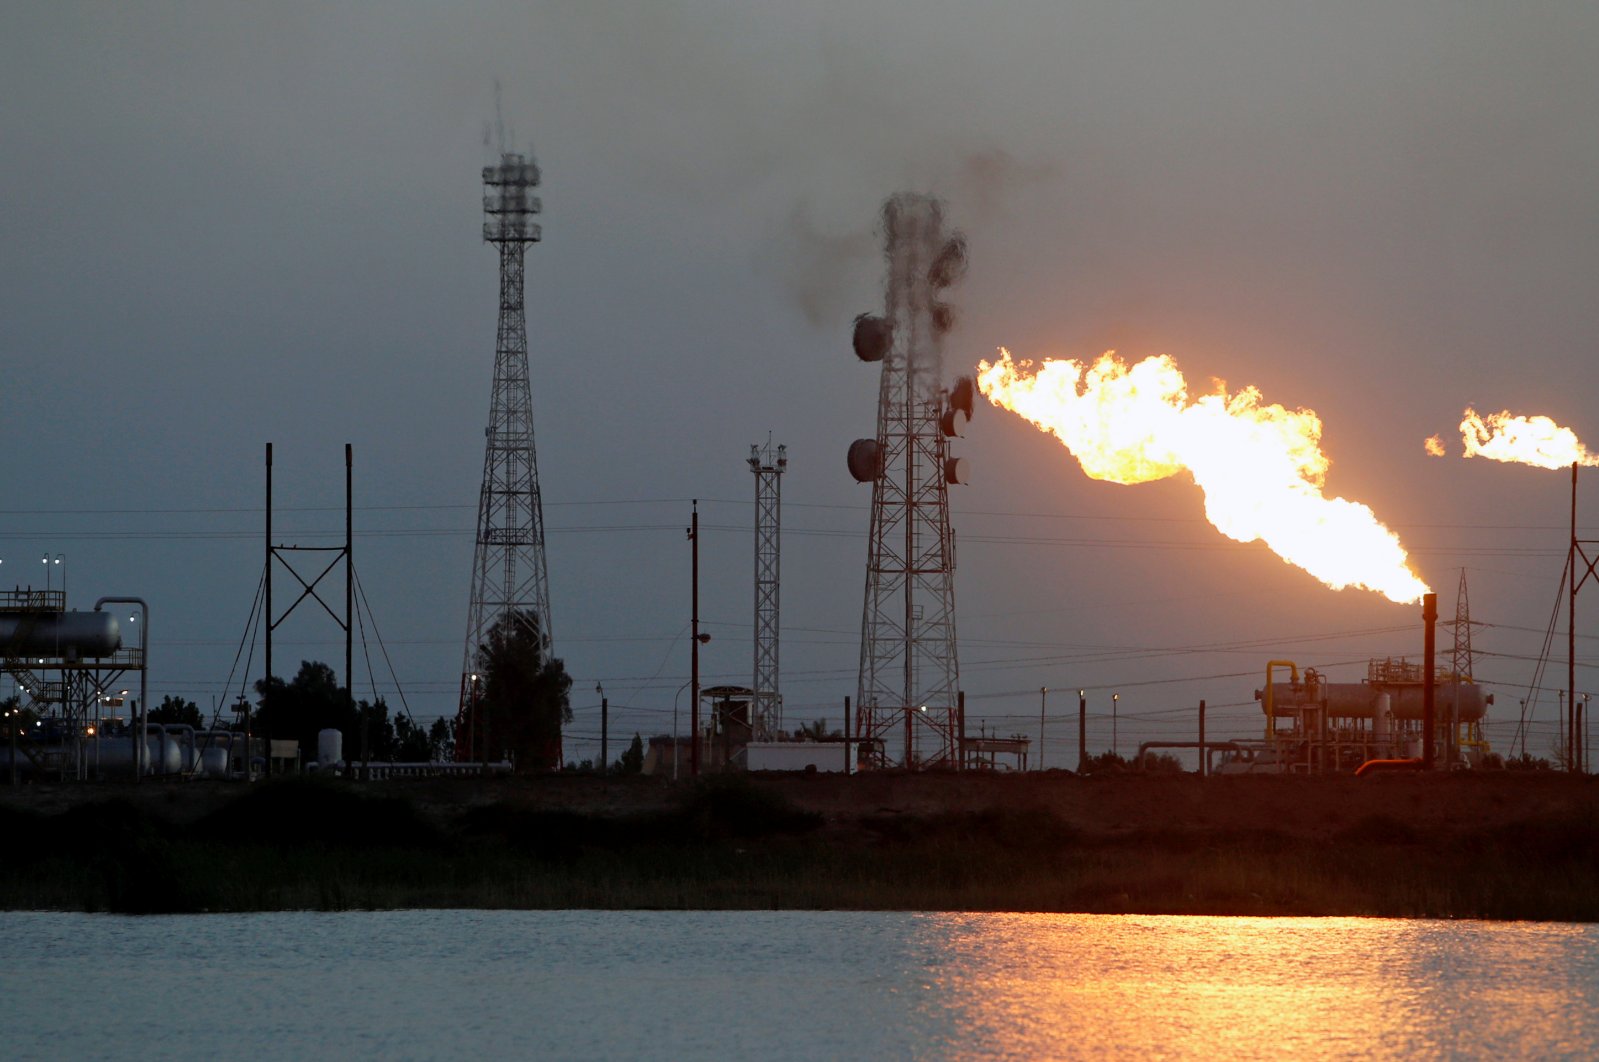 Flames emerge from flare stacks at Nahr Bin Umar oil field, north of Basra, Iraq, March 9, 2020. (Reuters Photo)